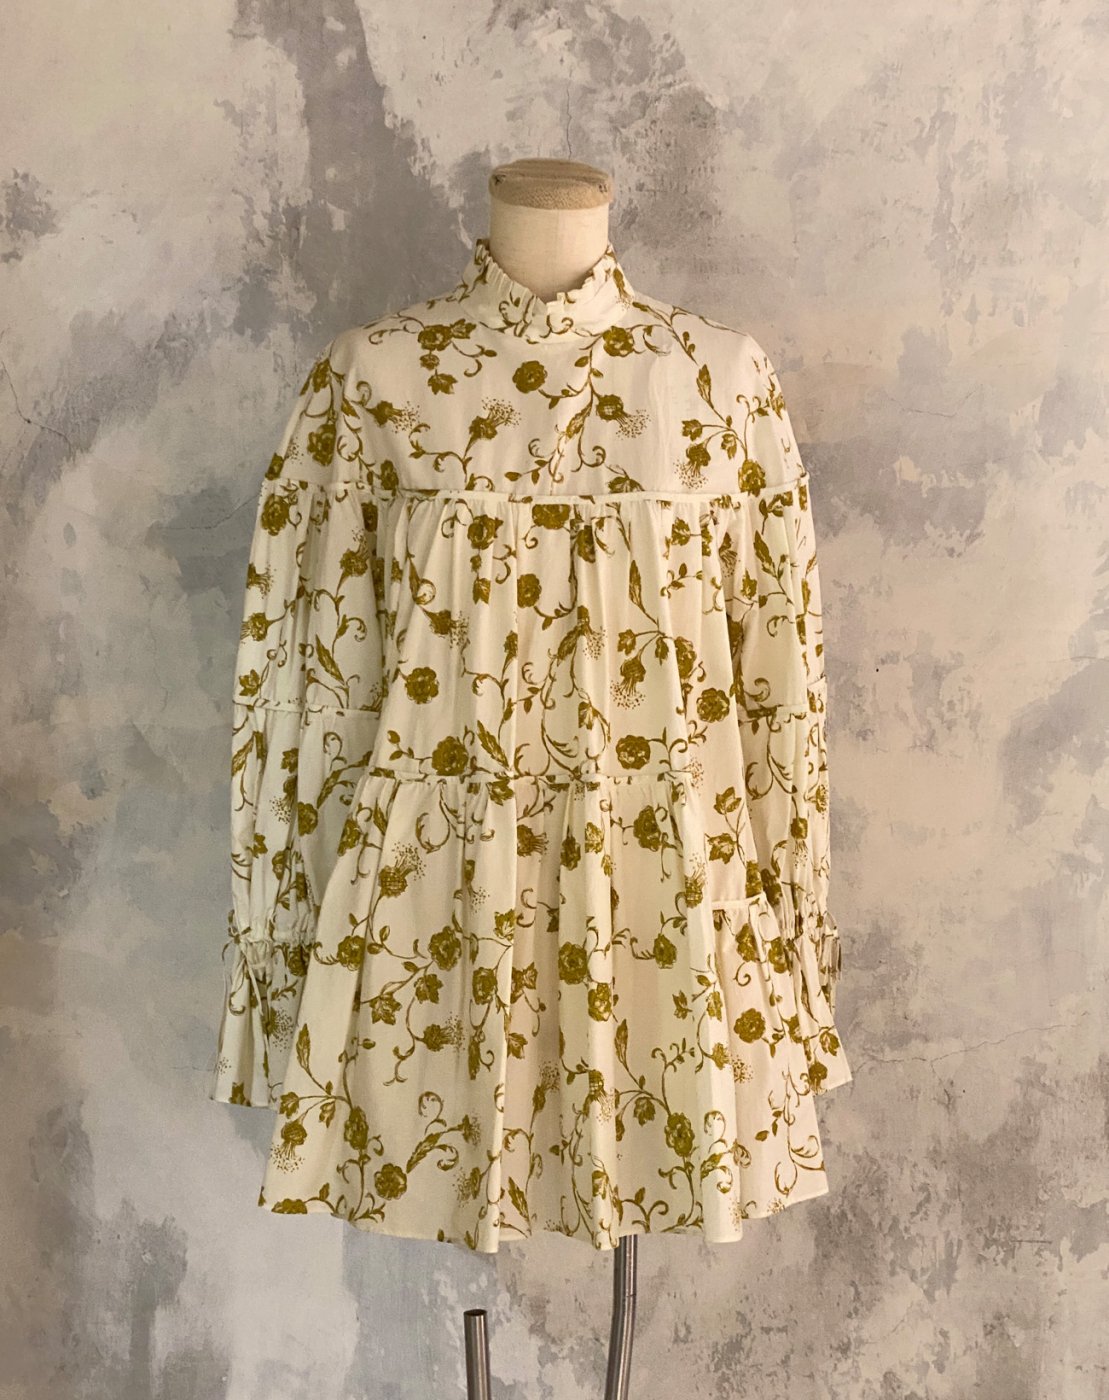 leur logette - <img class='new_mark_img1' src='https://img.shop-pro.jp/img/new/icons2.gif' style='border:none;display:inline;margin:0px;padding:0px;width:auto;' />Royal Flower Print Blouse - Off White